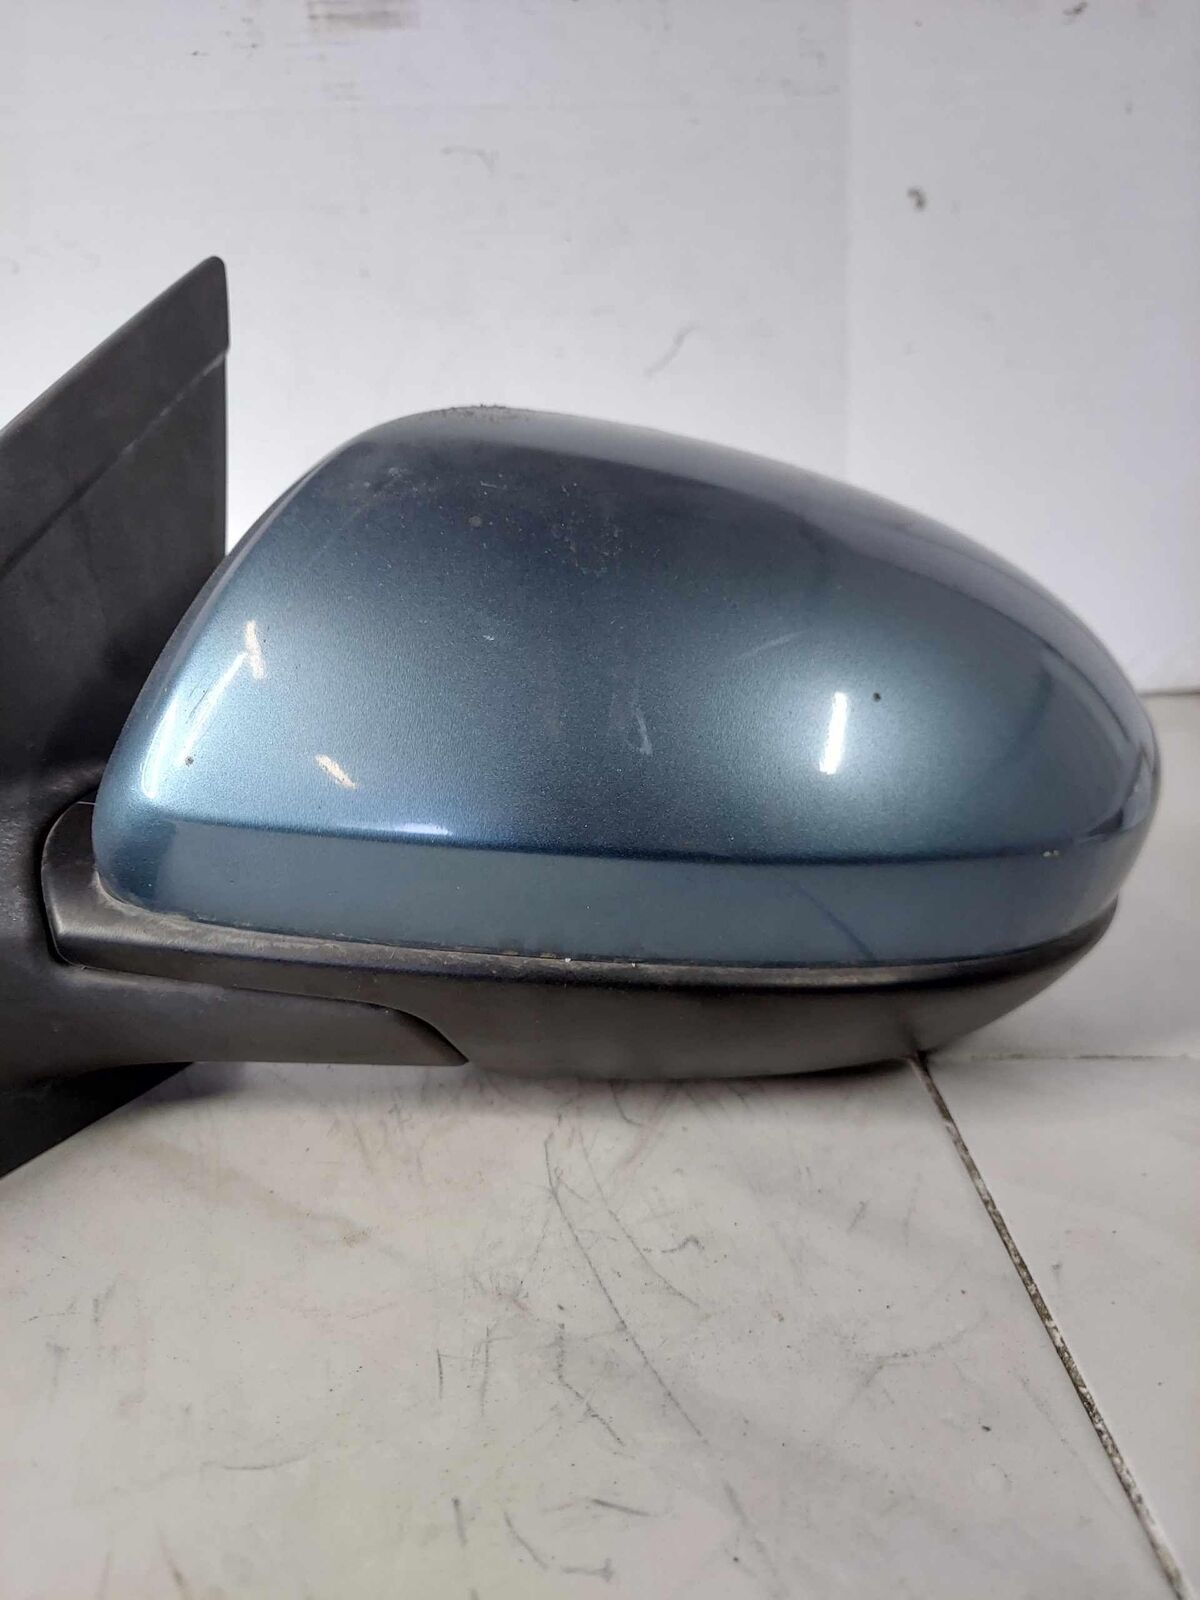 Door Mirror Left Driver Side View Assembly Blue OEM MAZDA 3 10 11 12 13